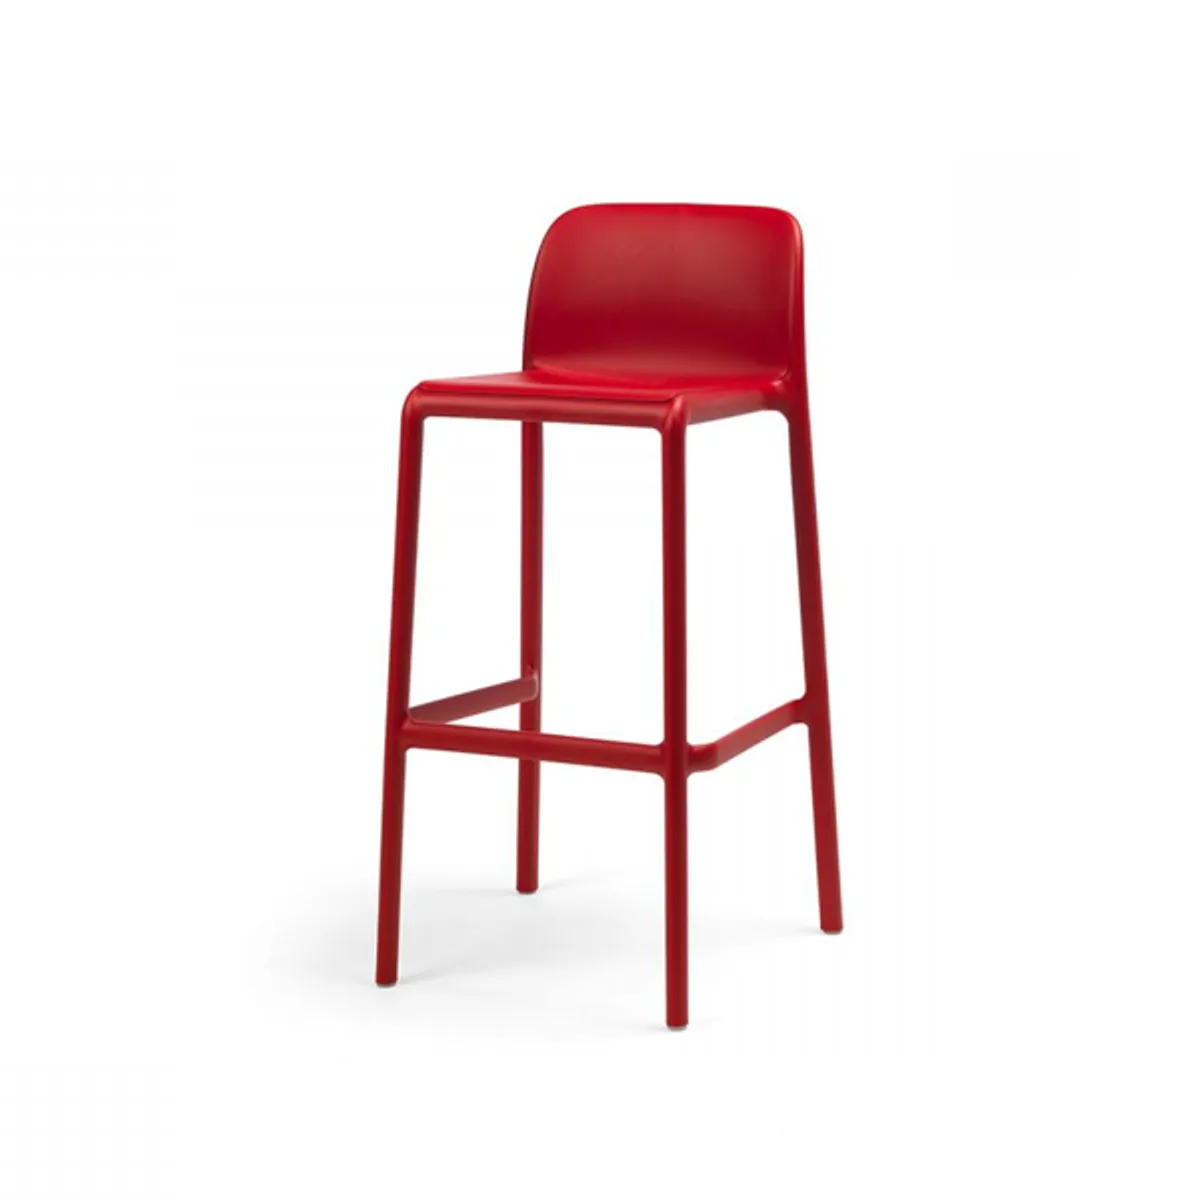 Faro bar stool Inside Out Contracts1